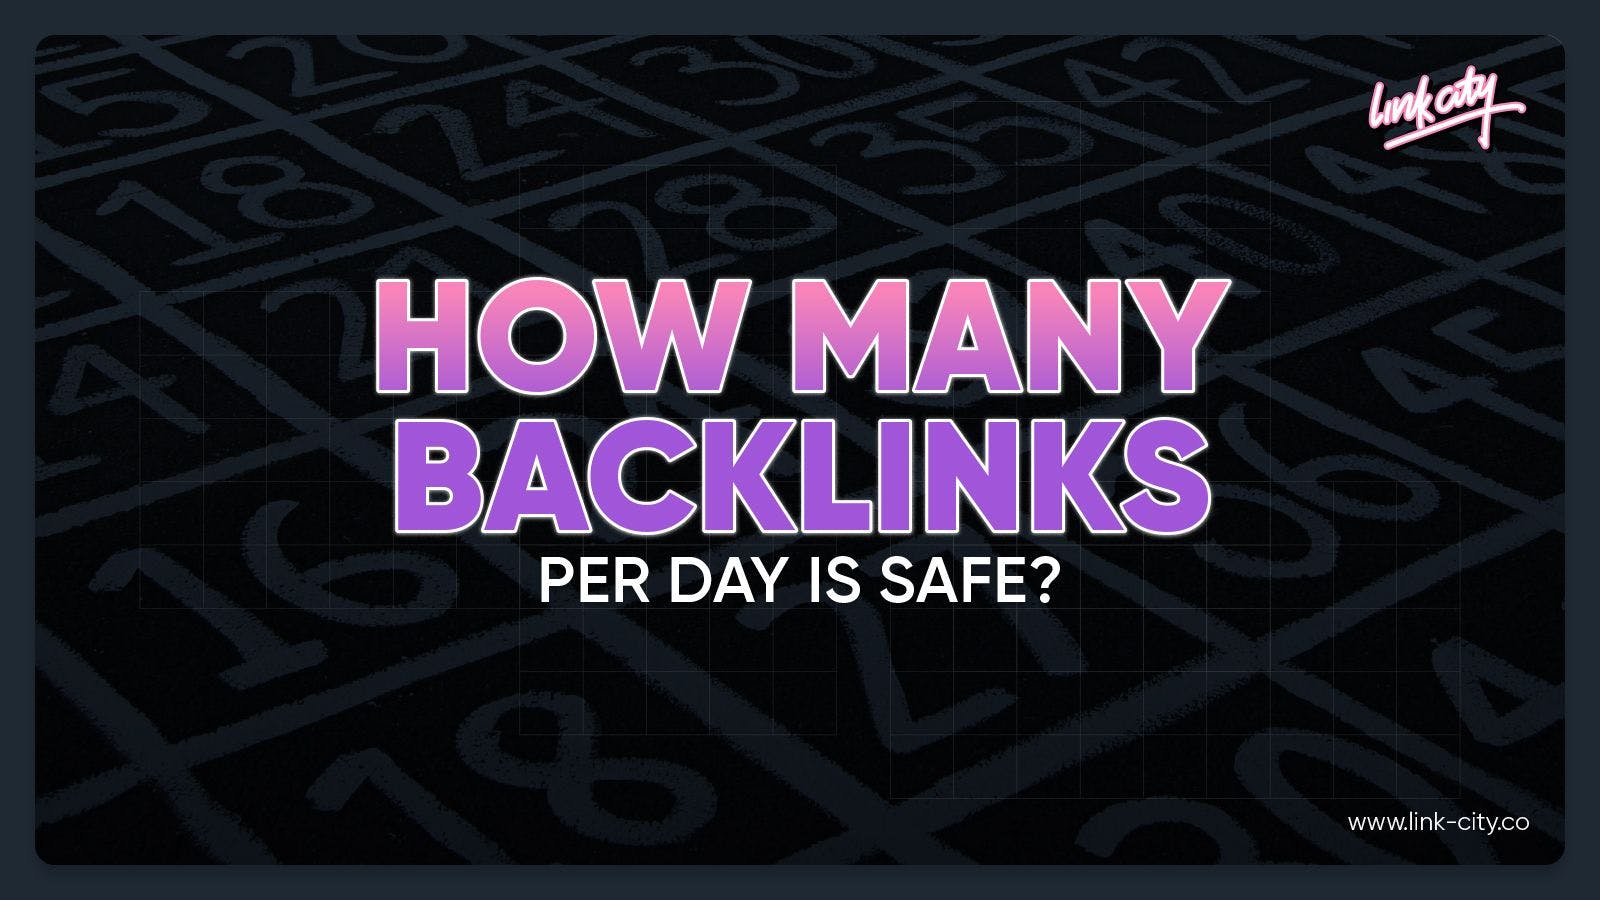 How Many Backlinks Per Day Is Safe?